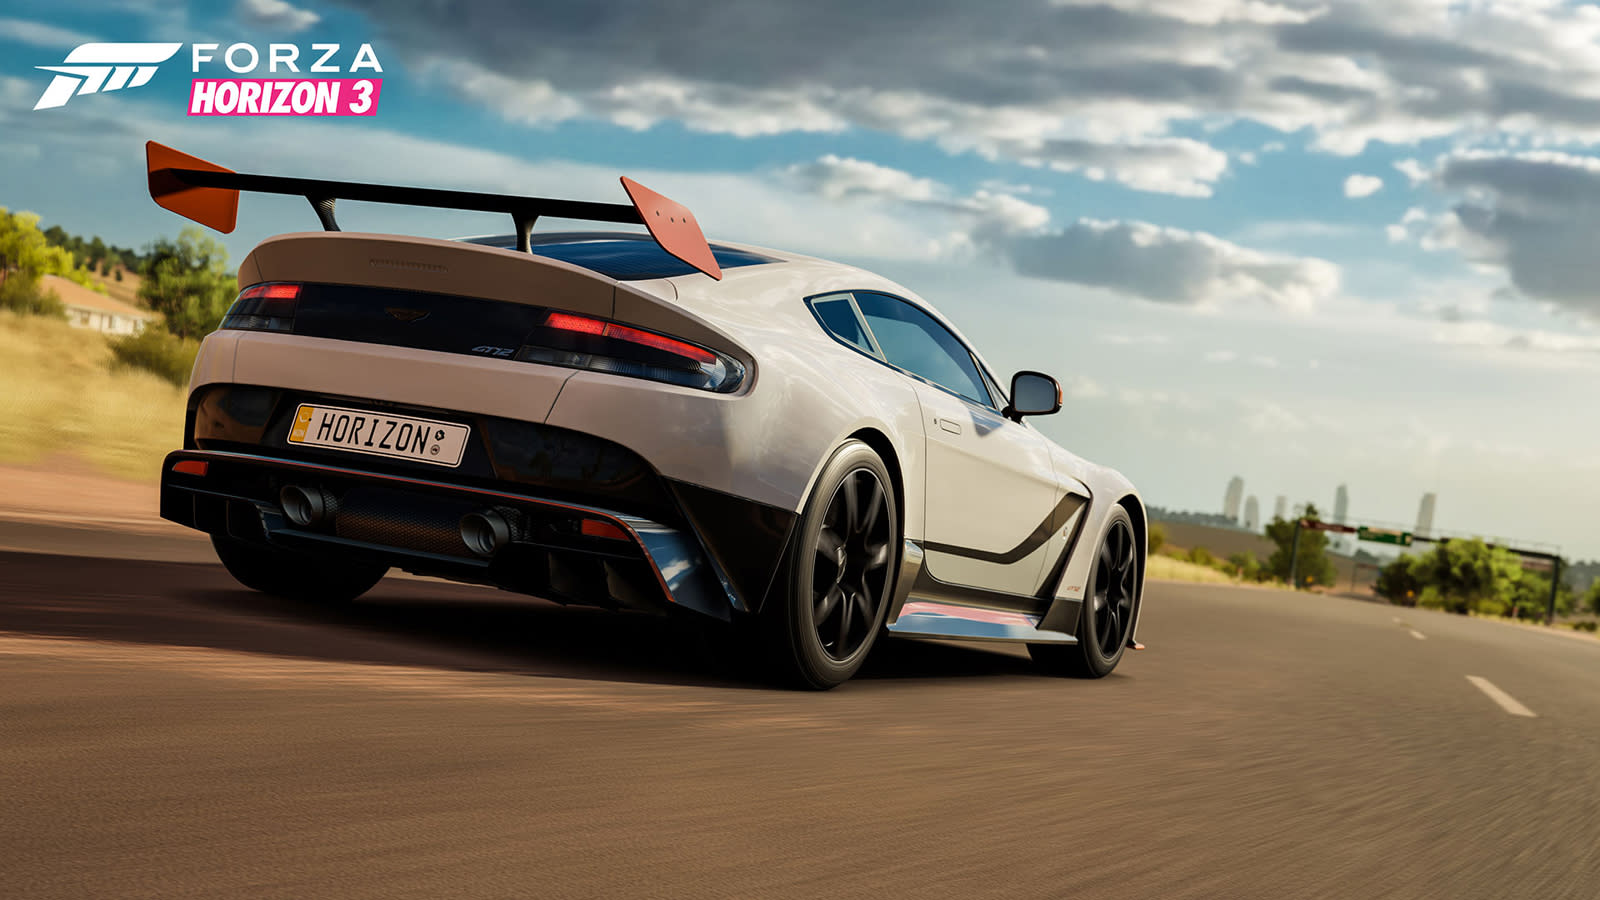 Microsoft Released The Wrong Version Of Forza Horizon 3 For Pc Images, Photos, Reviews